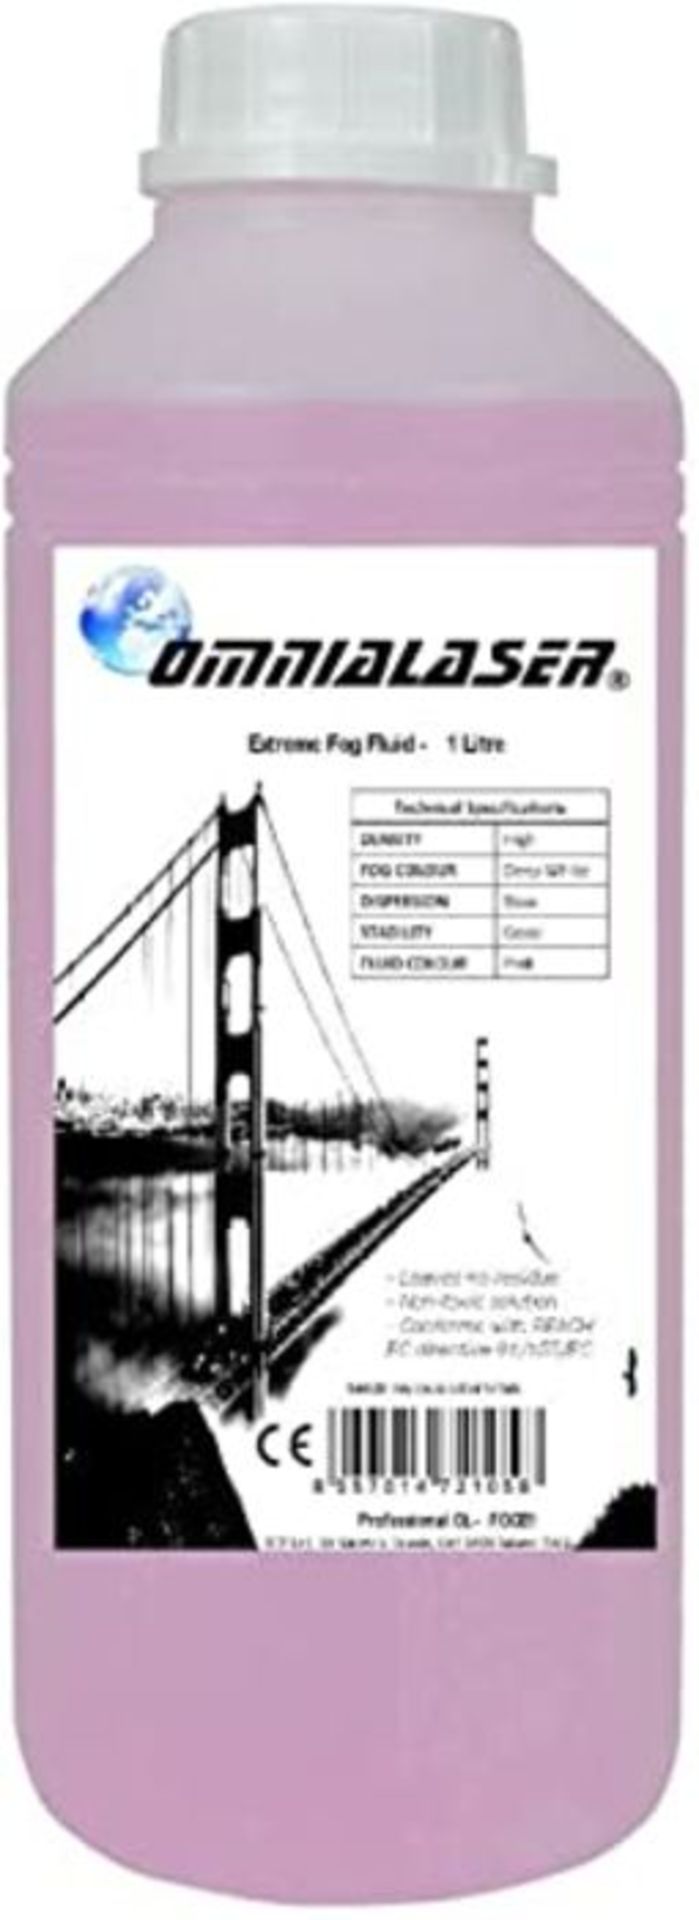 OmniaLaser ol-foge1 Liquid for The Smoke OmniaLaser Extreme Suitable for All Machines